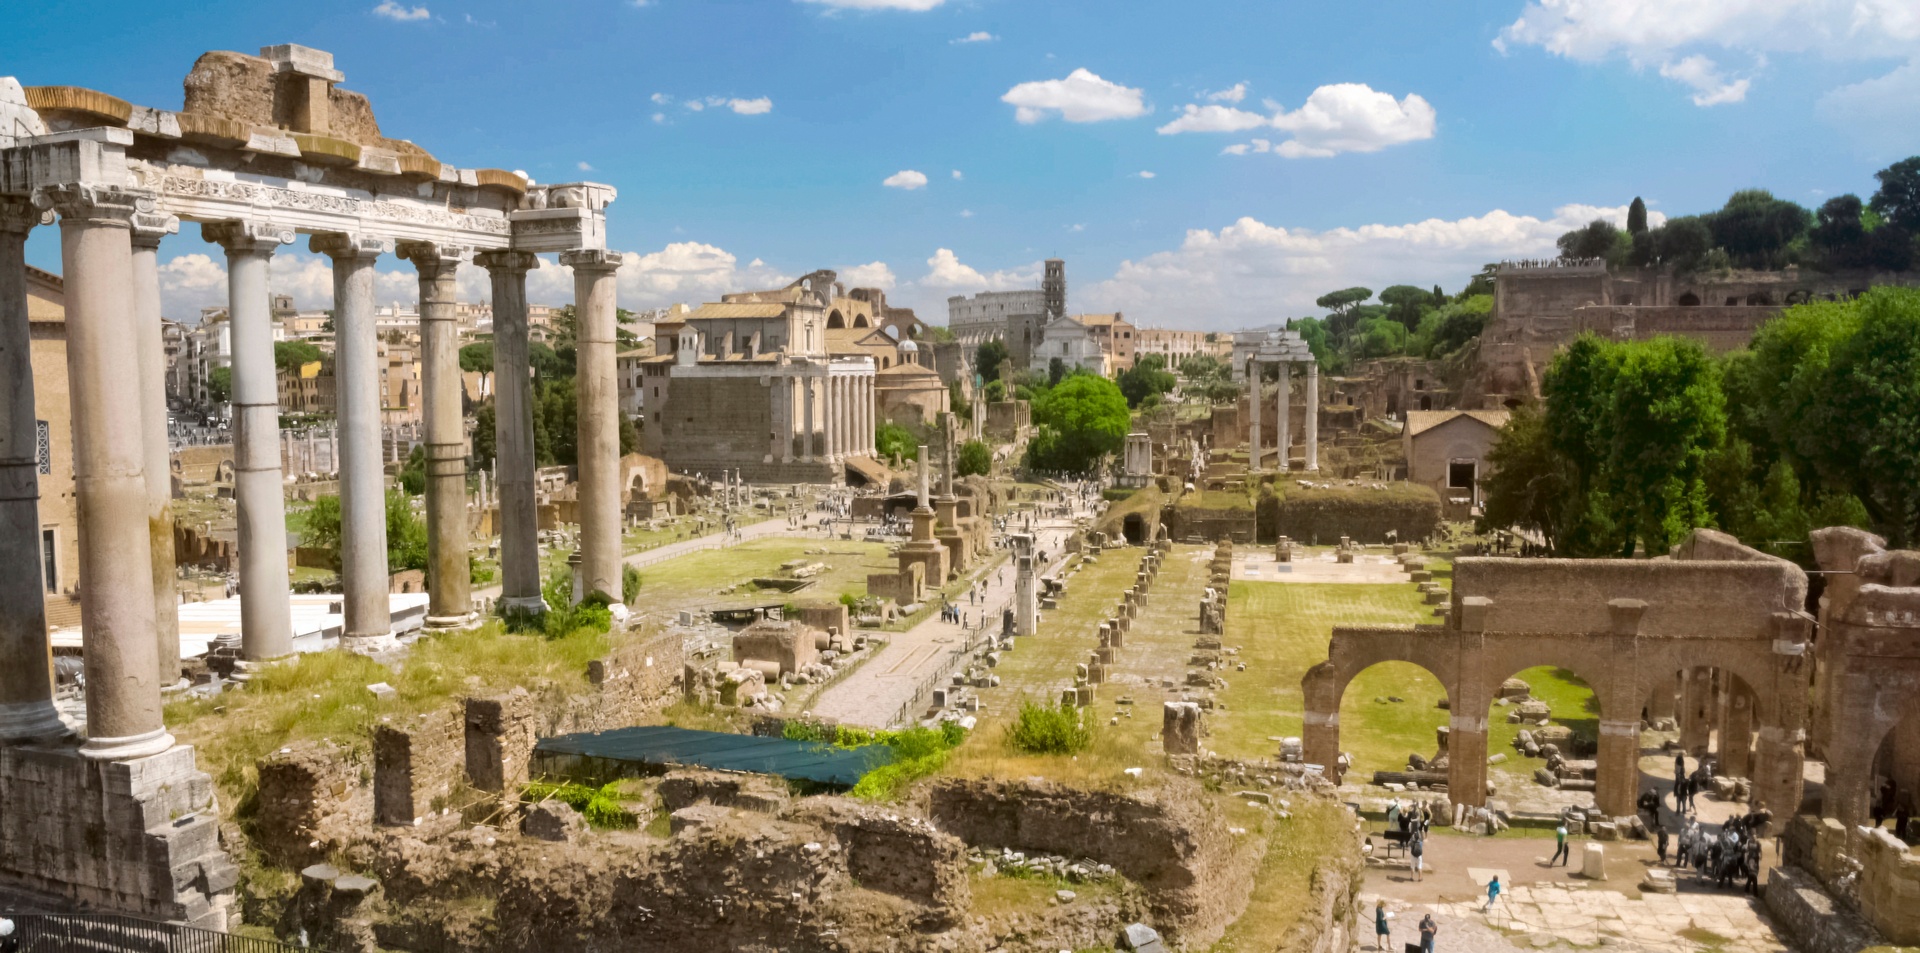 Ruins of Roman Forum in Rome, Italy. Photo copyrighted and licensed. Photo by Motortion